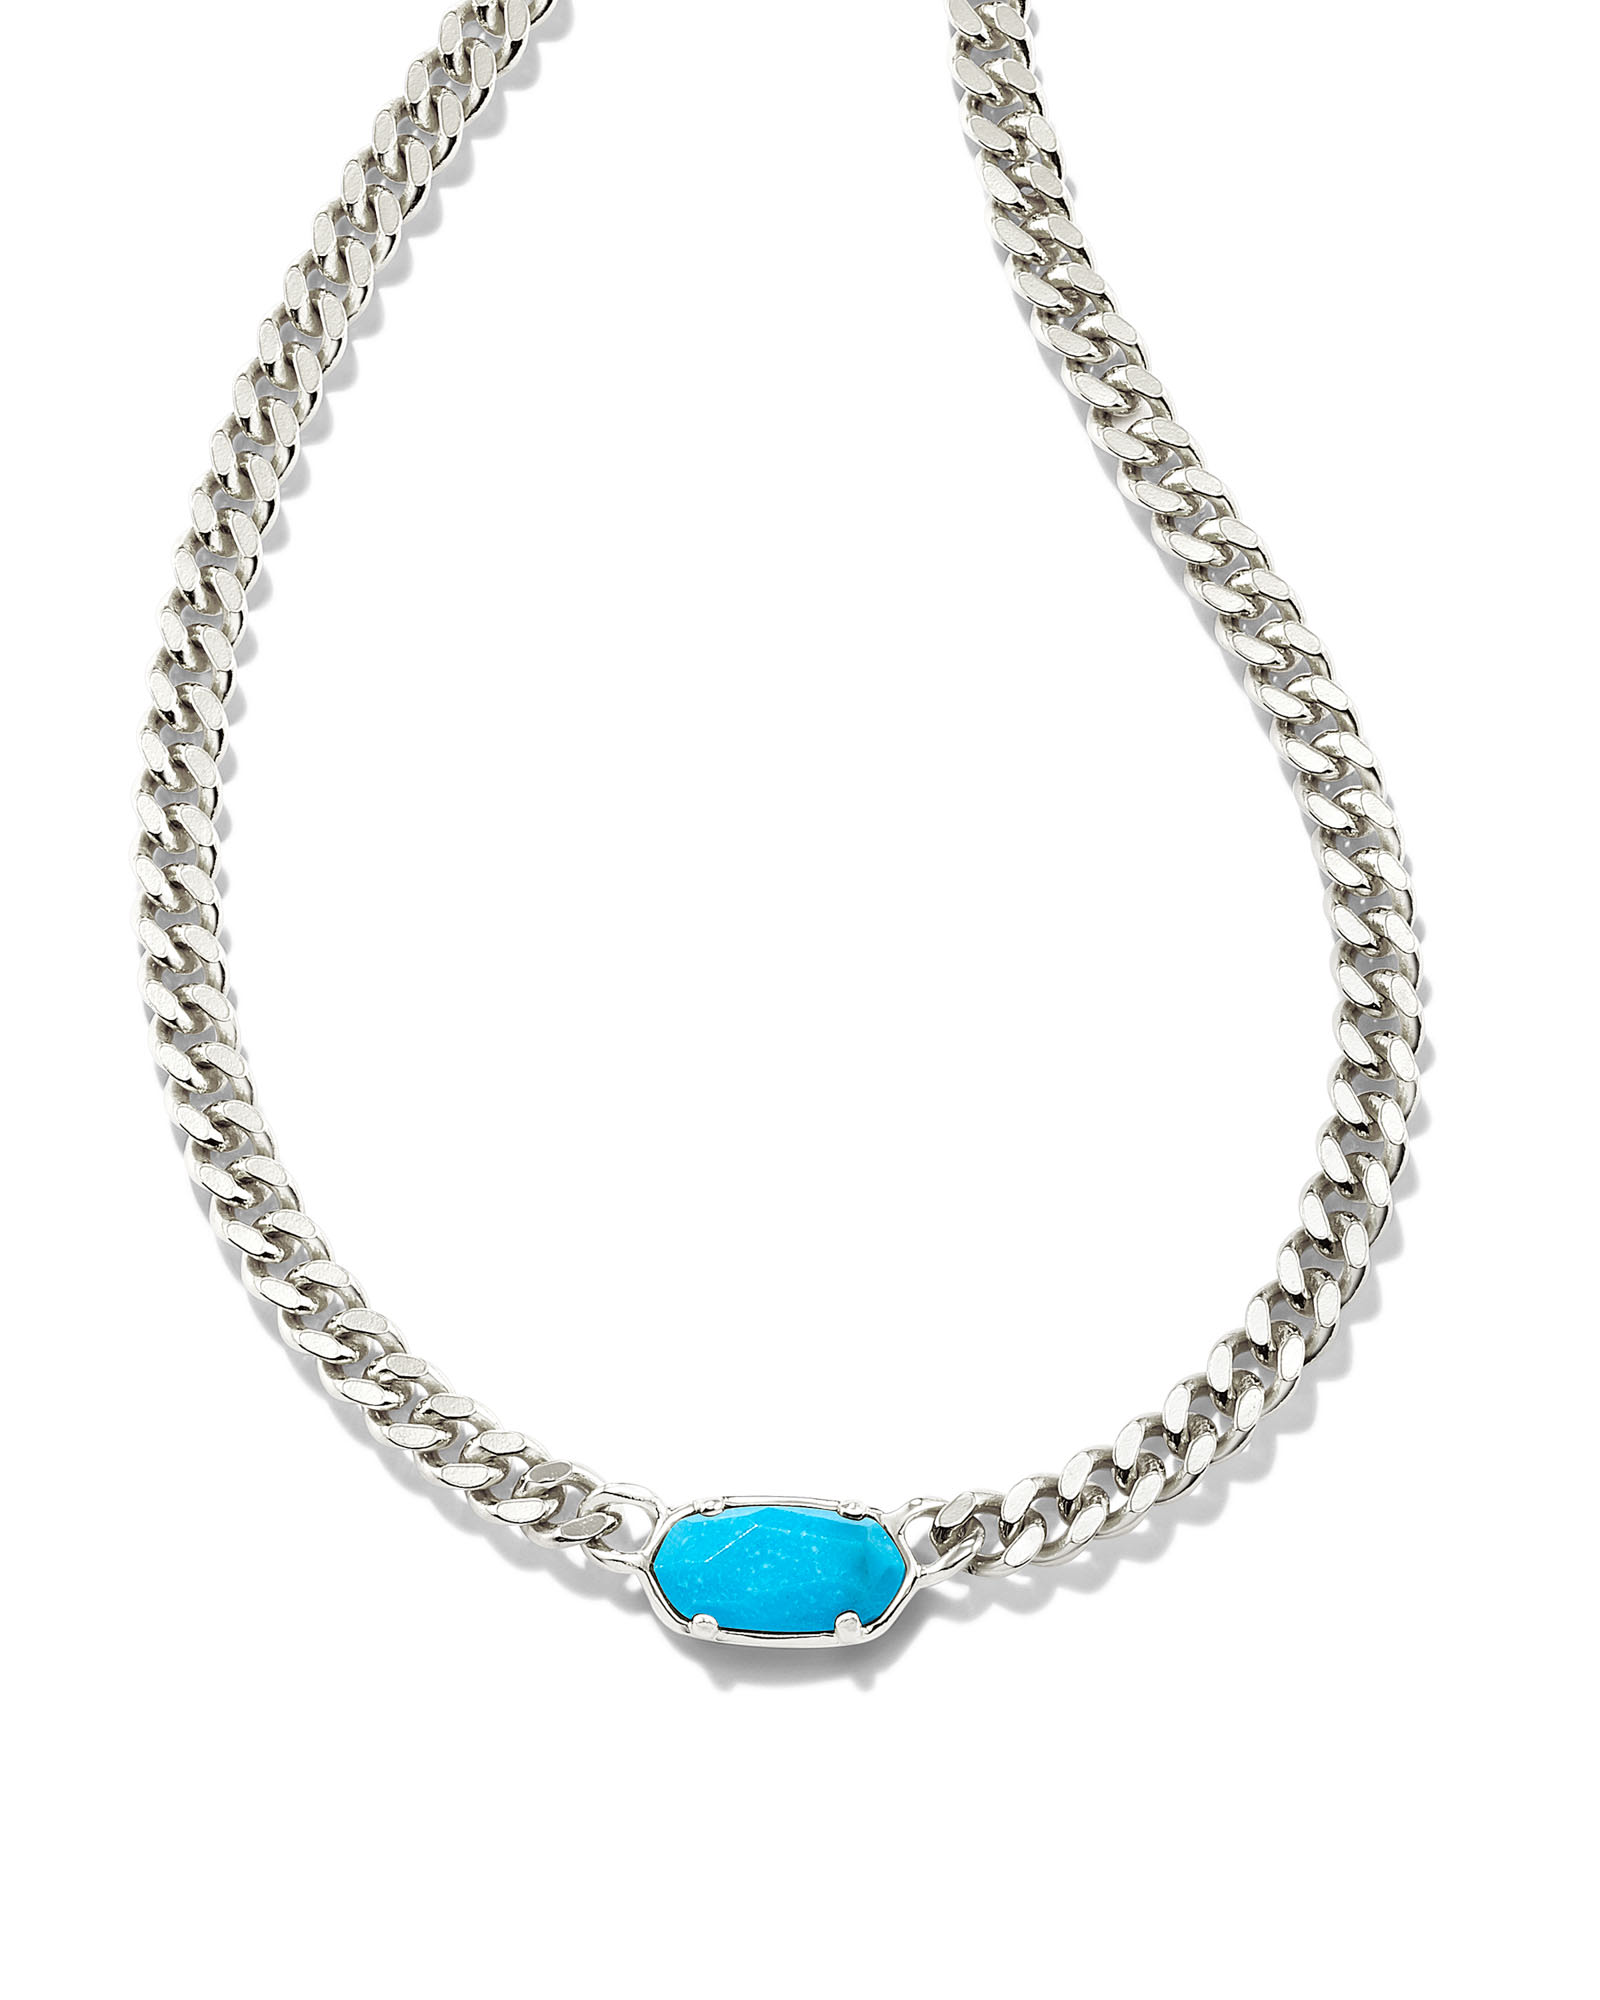 Elisa Sterling Silver Curb Chain Necklace in Turquoise